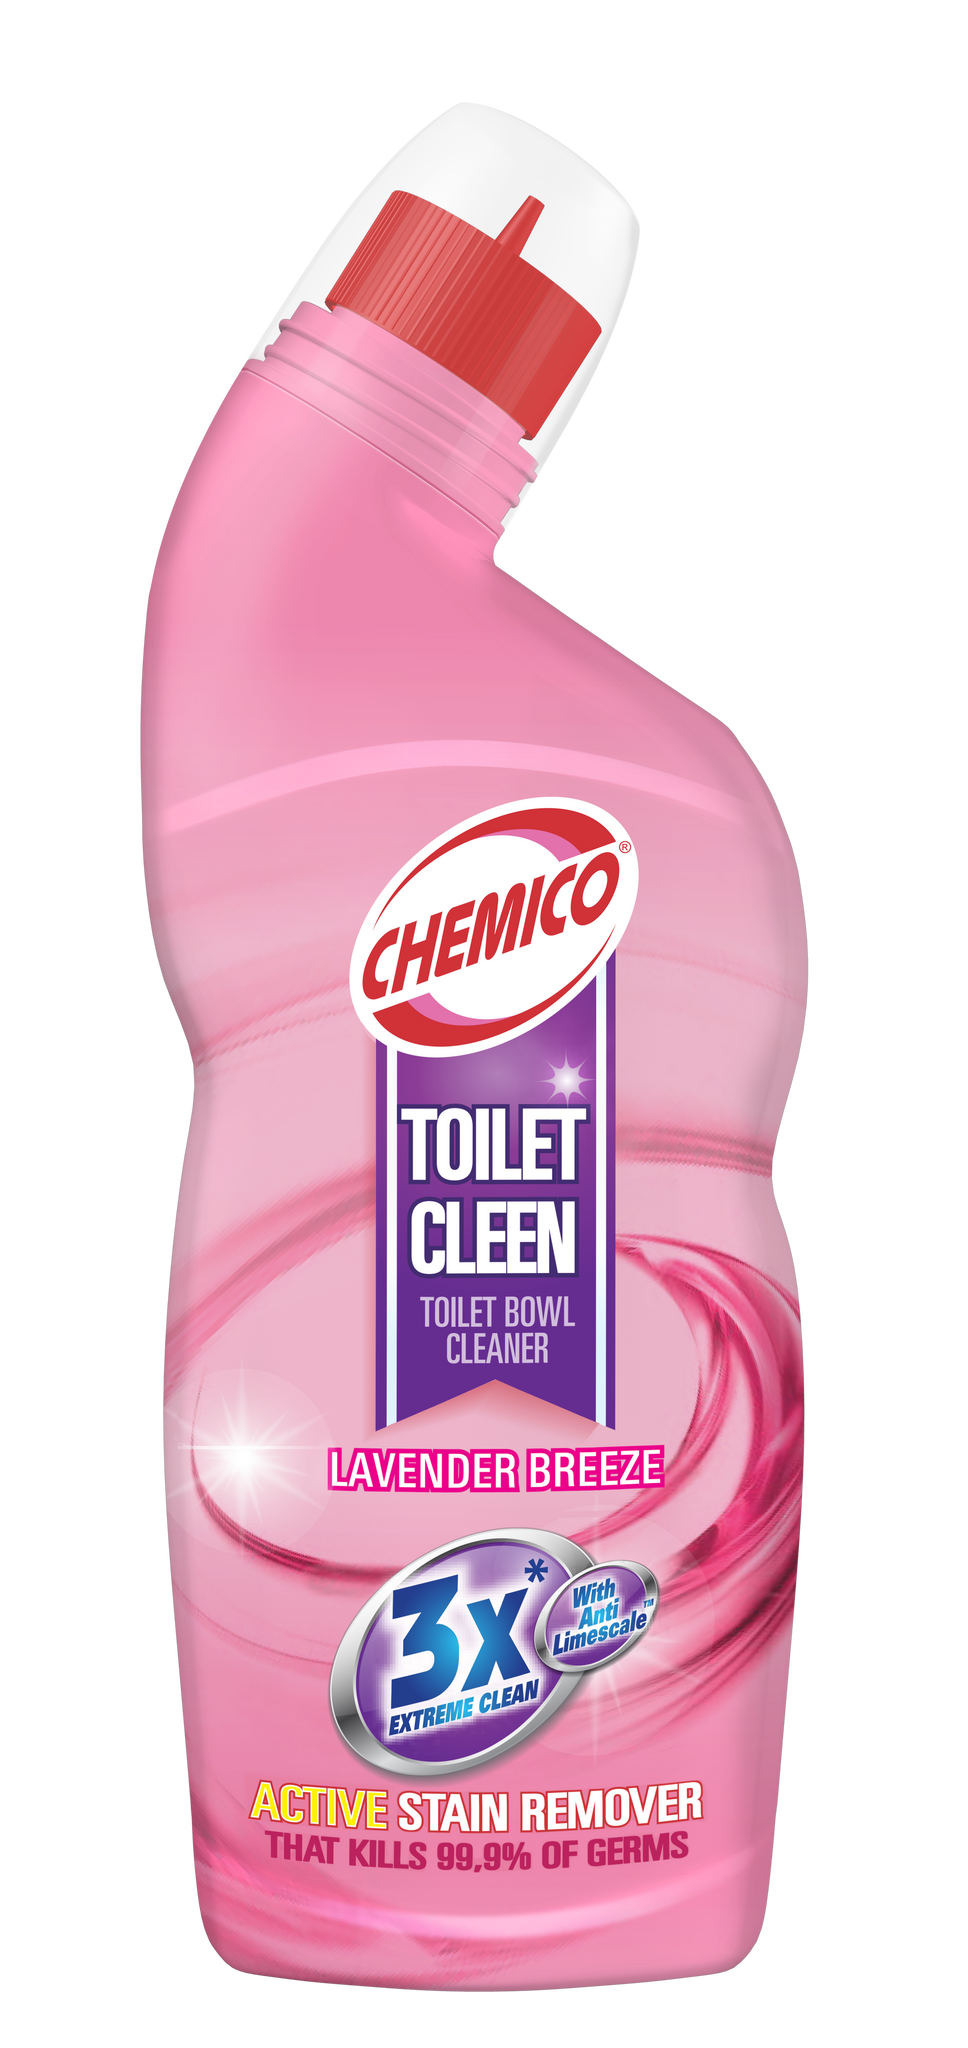 Chemico Toilet Cleen - Lavender Breeze - 500ml 12-Pack